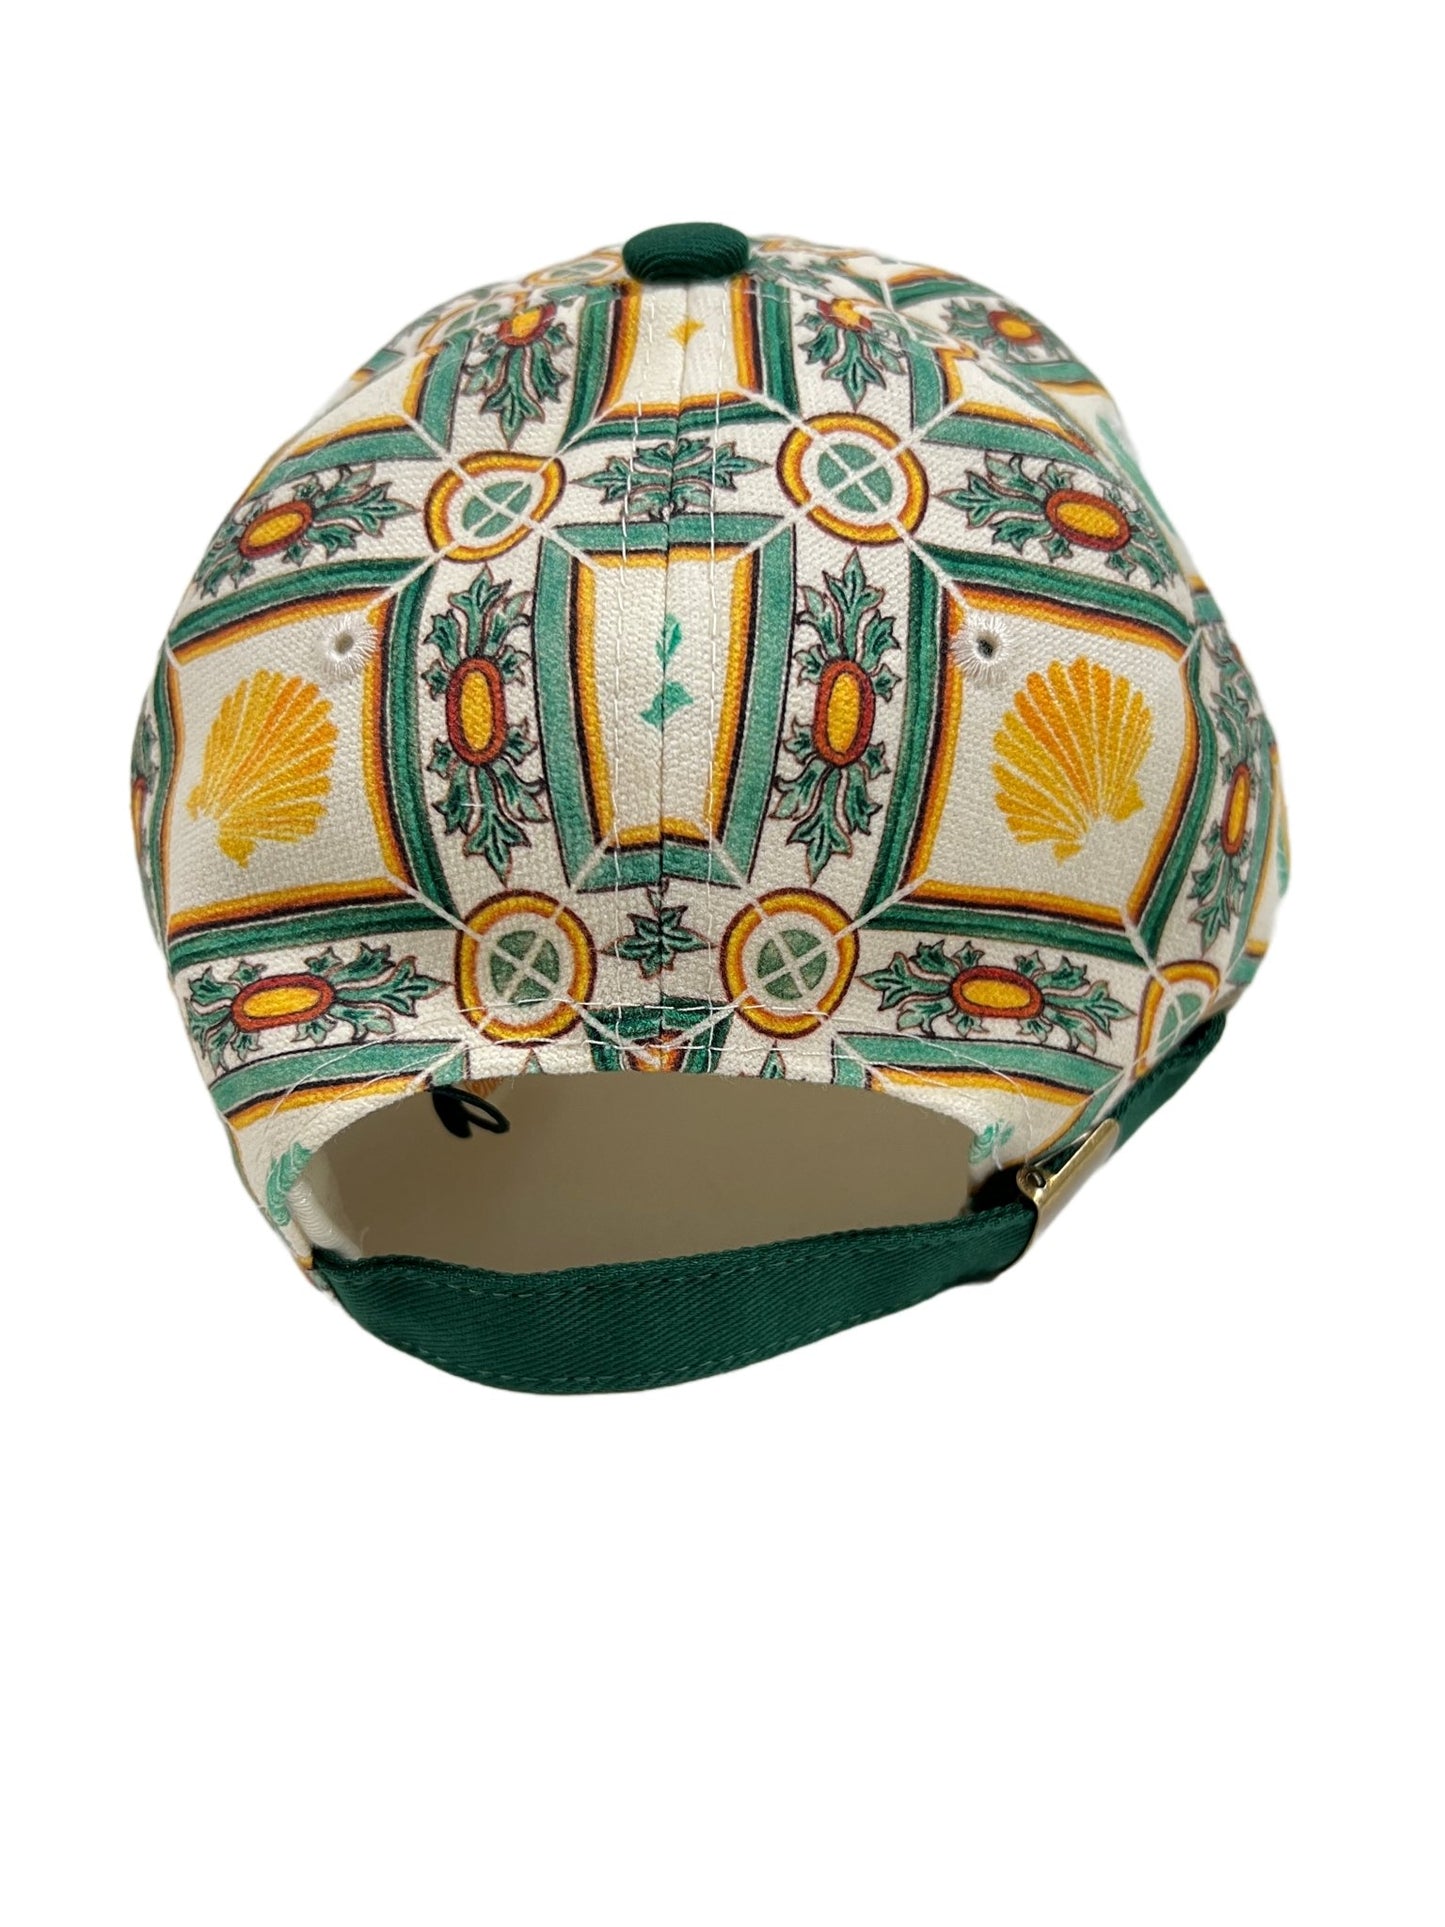 A green and white DROLE DE MONSIEUR HAT CP117-CO041 LA CASQUETTE SHELL GREEN with a print on it.